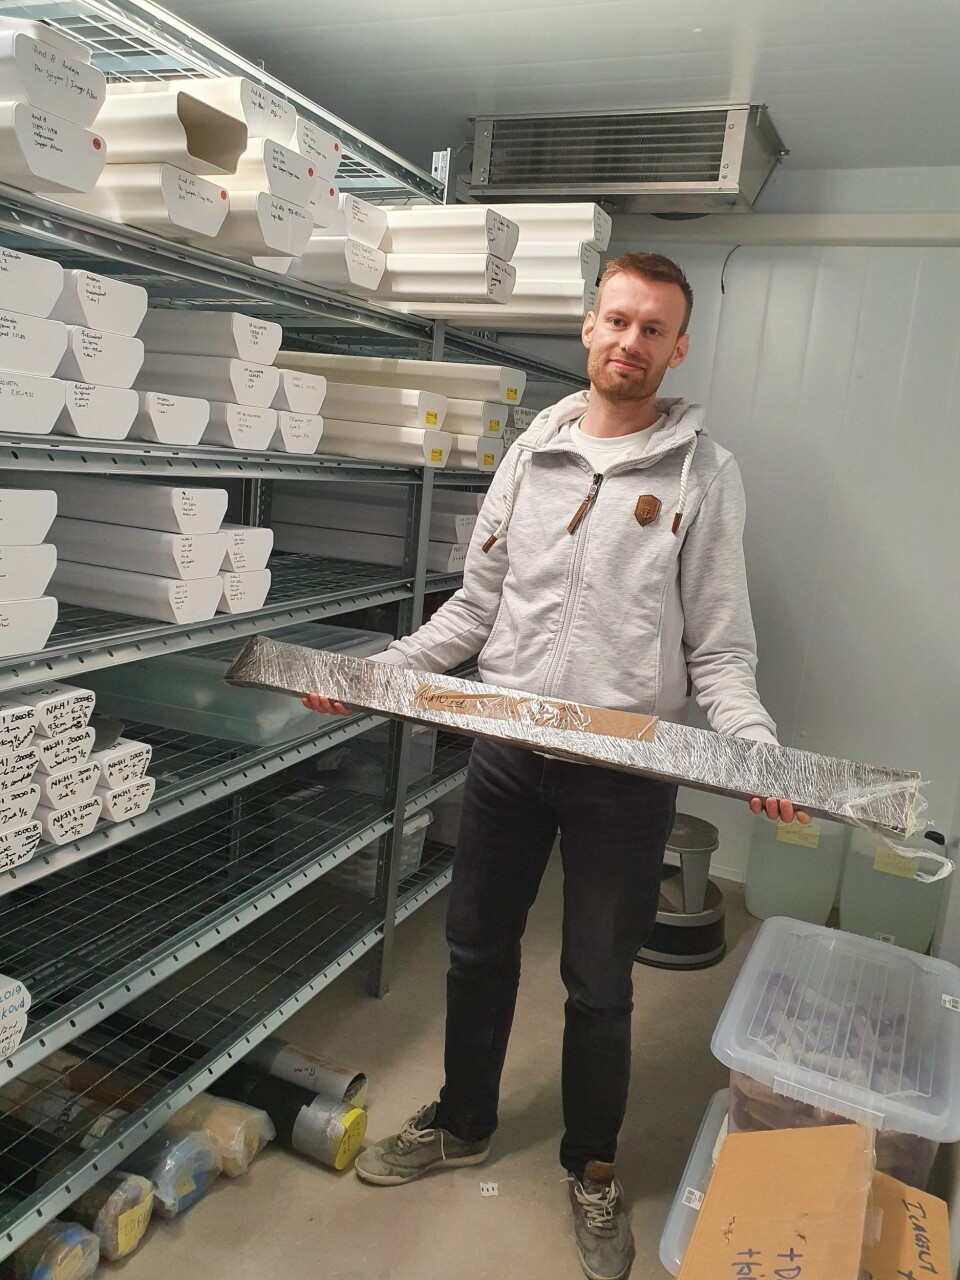 Youri Lammers holding a section from the sediment core in the storage at the Tromsø University Museum.